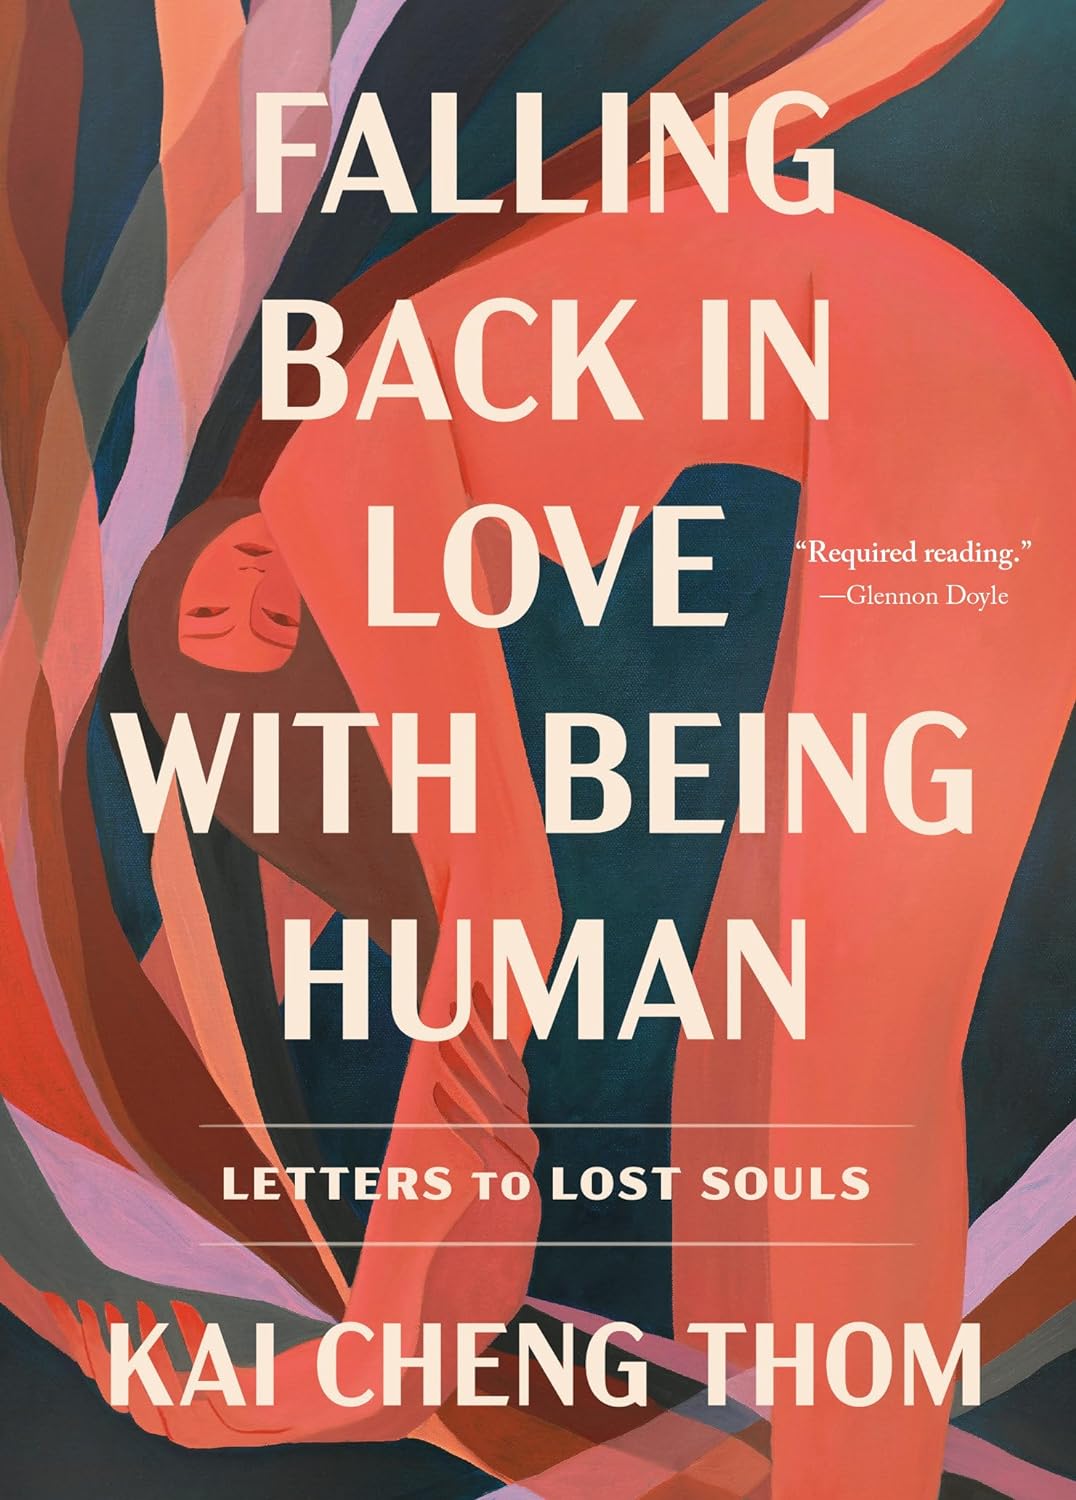 Falling Back in Love with Being Human Letters to Lost Souls - SureShot Books Publishing LLC